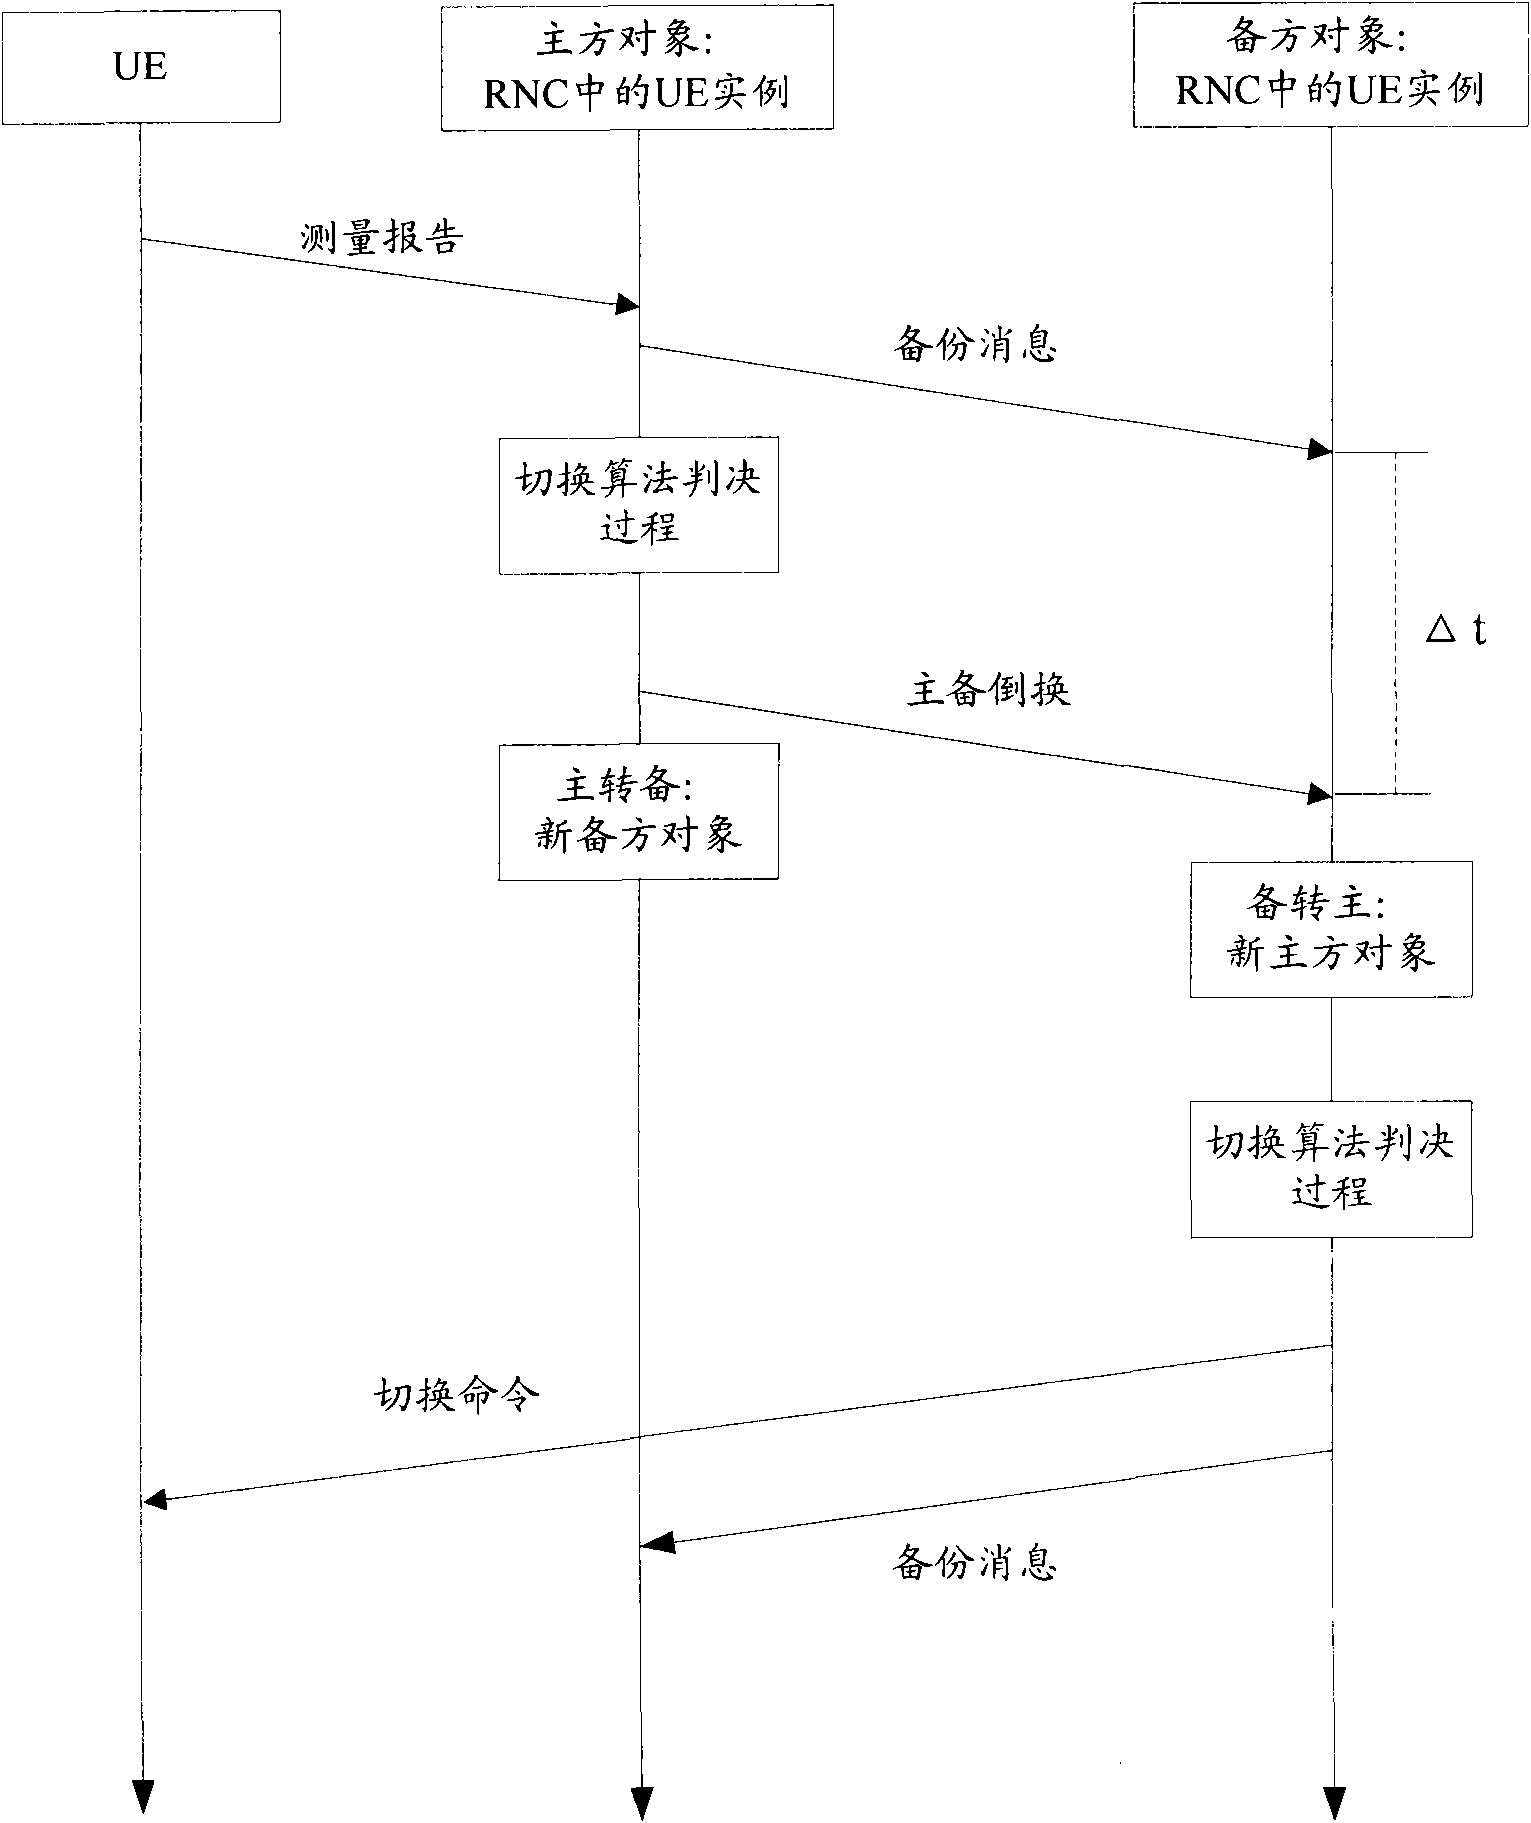 Main and standby rearranging method based on object